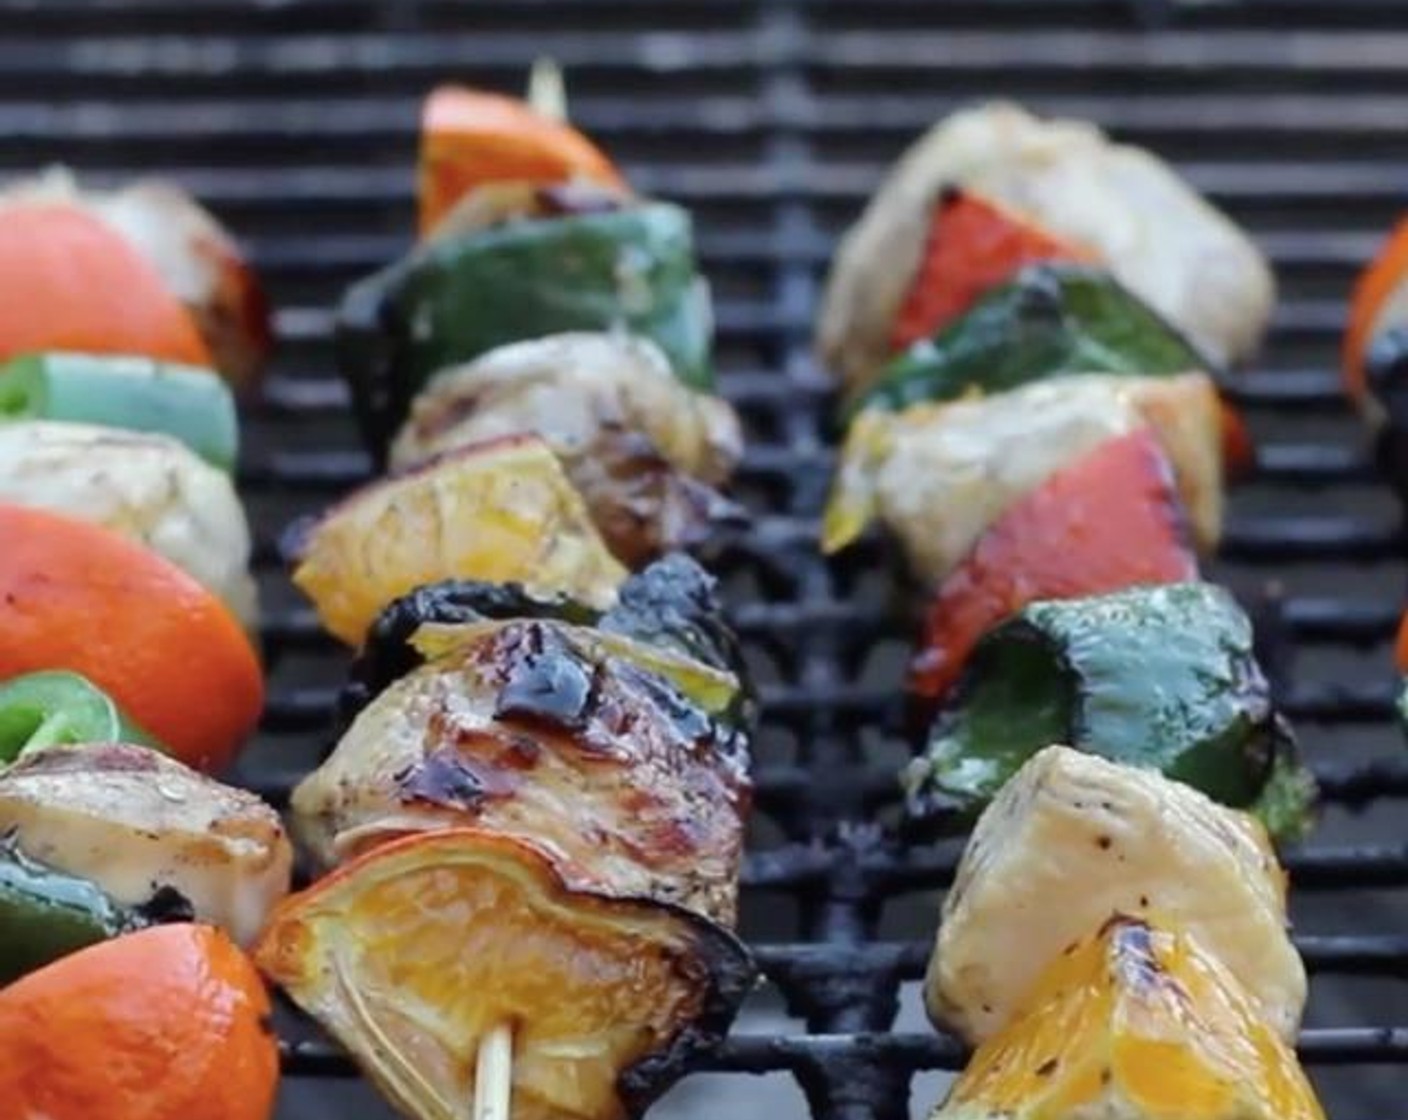 Grilled Orange and Ale Chicken Skewers